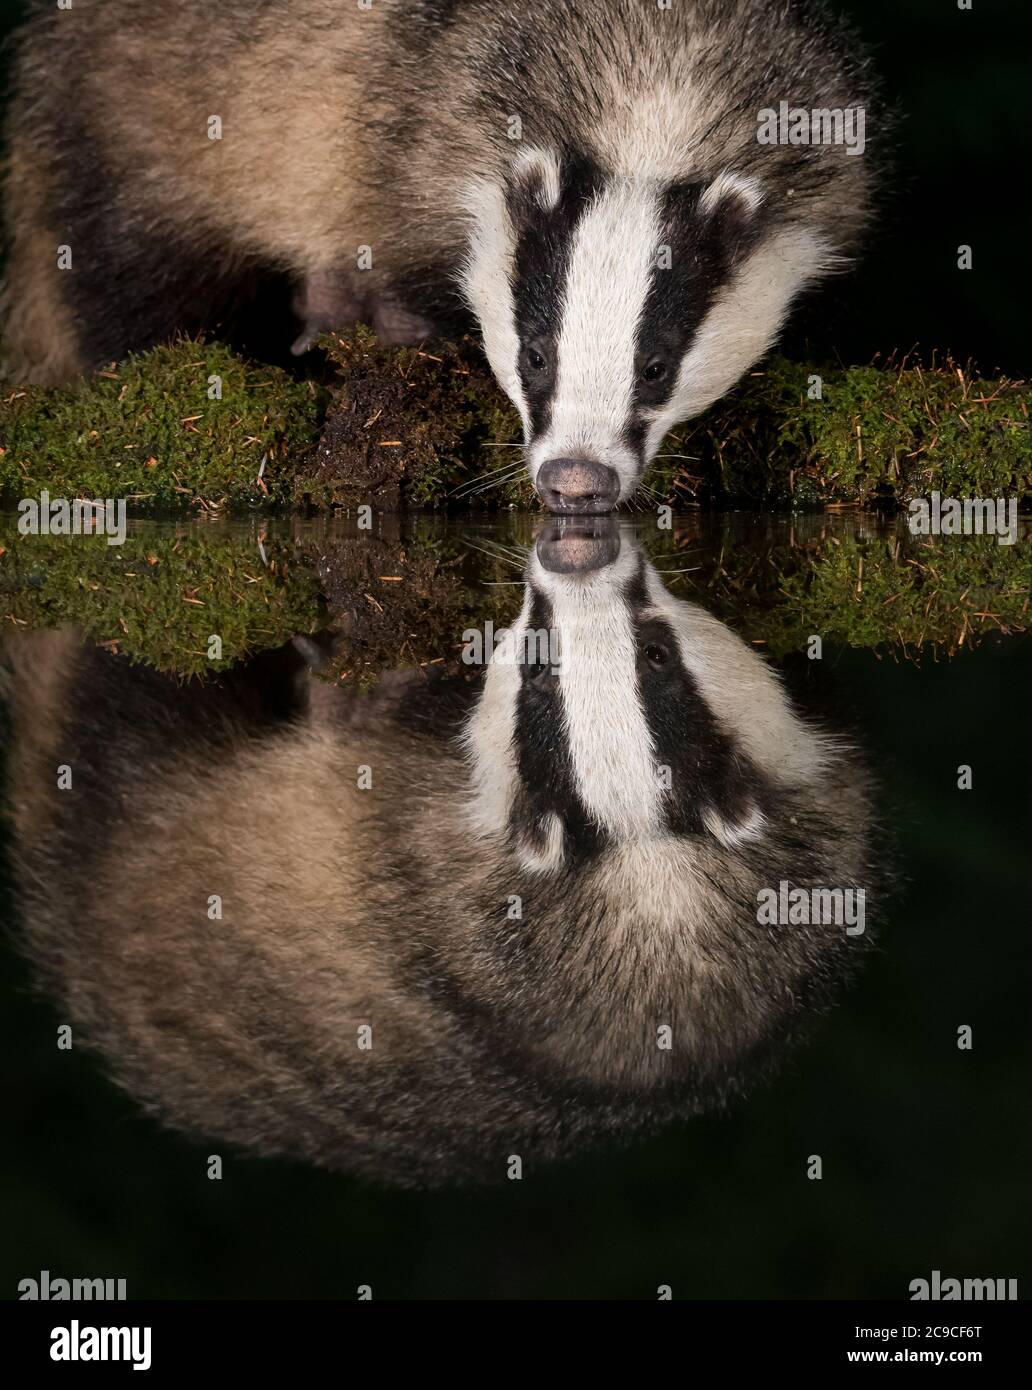 Badger drinking from a pool with reflection in water Stock Photo